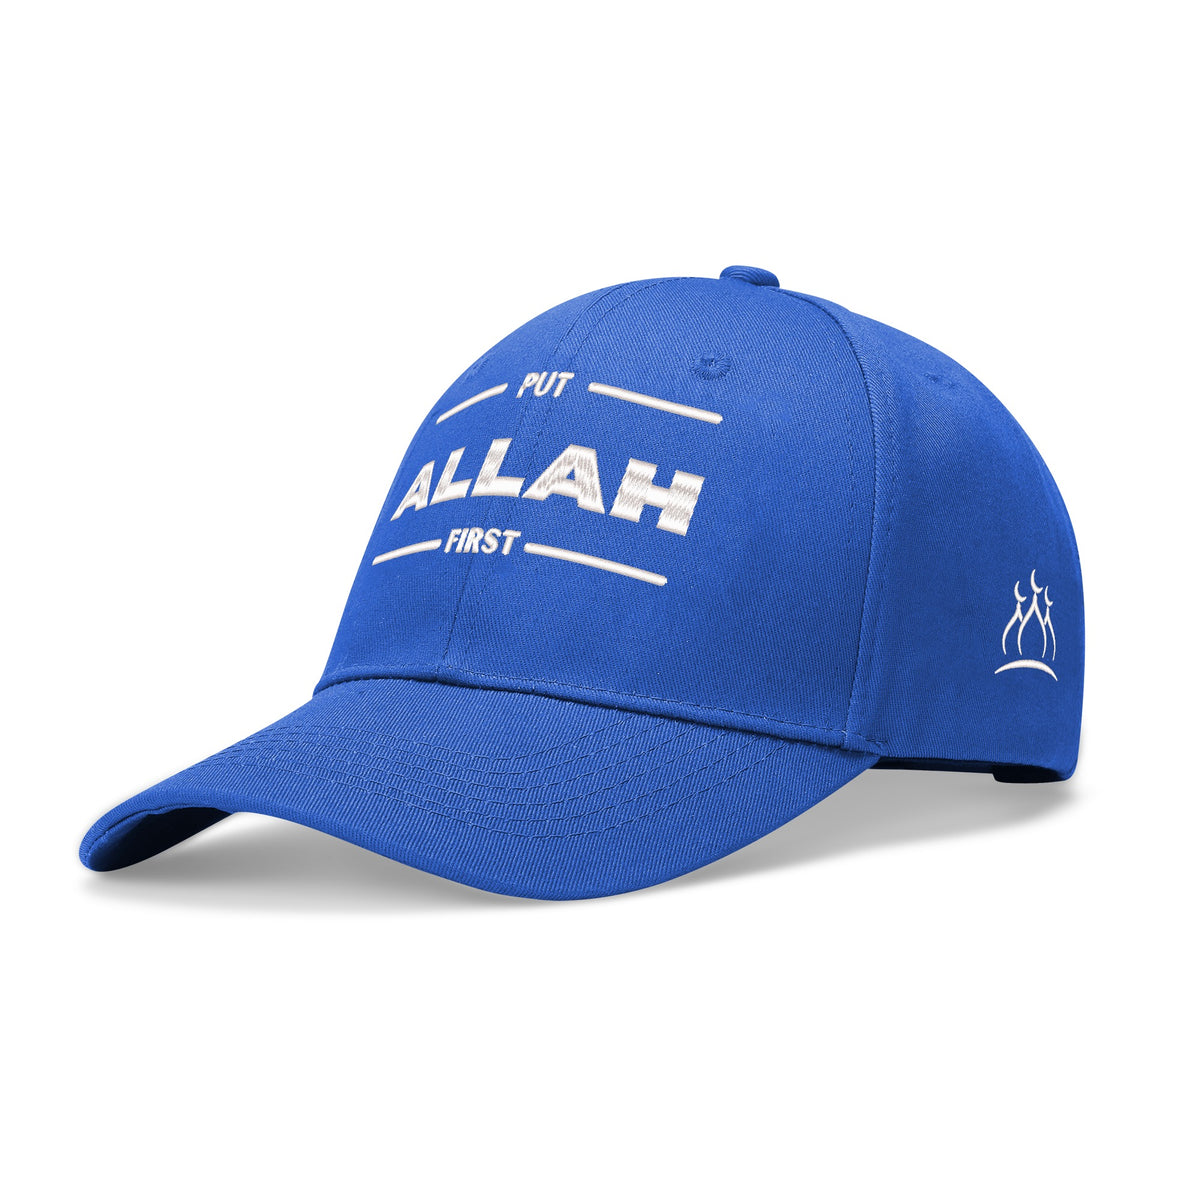 Put Allah First Embroidered Baseball Caps